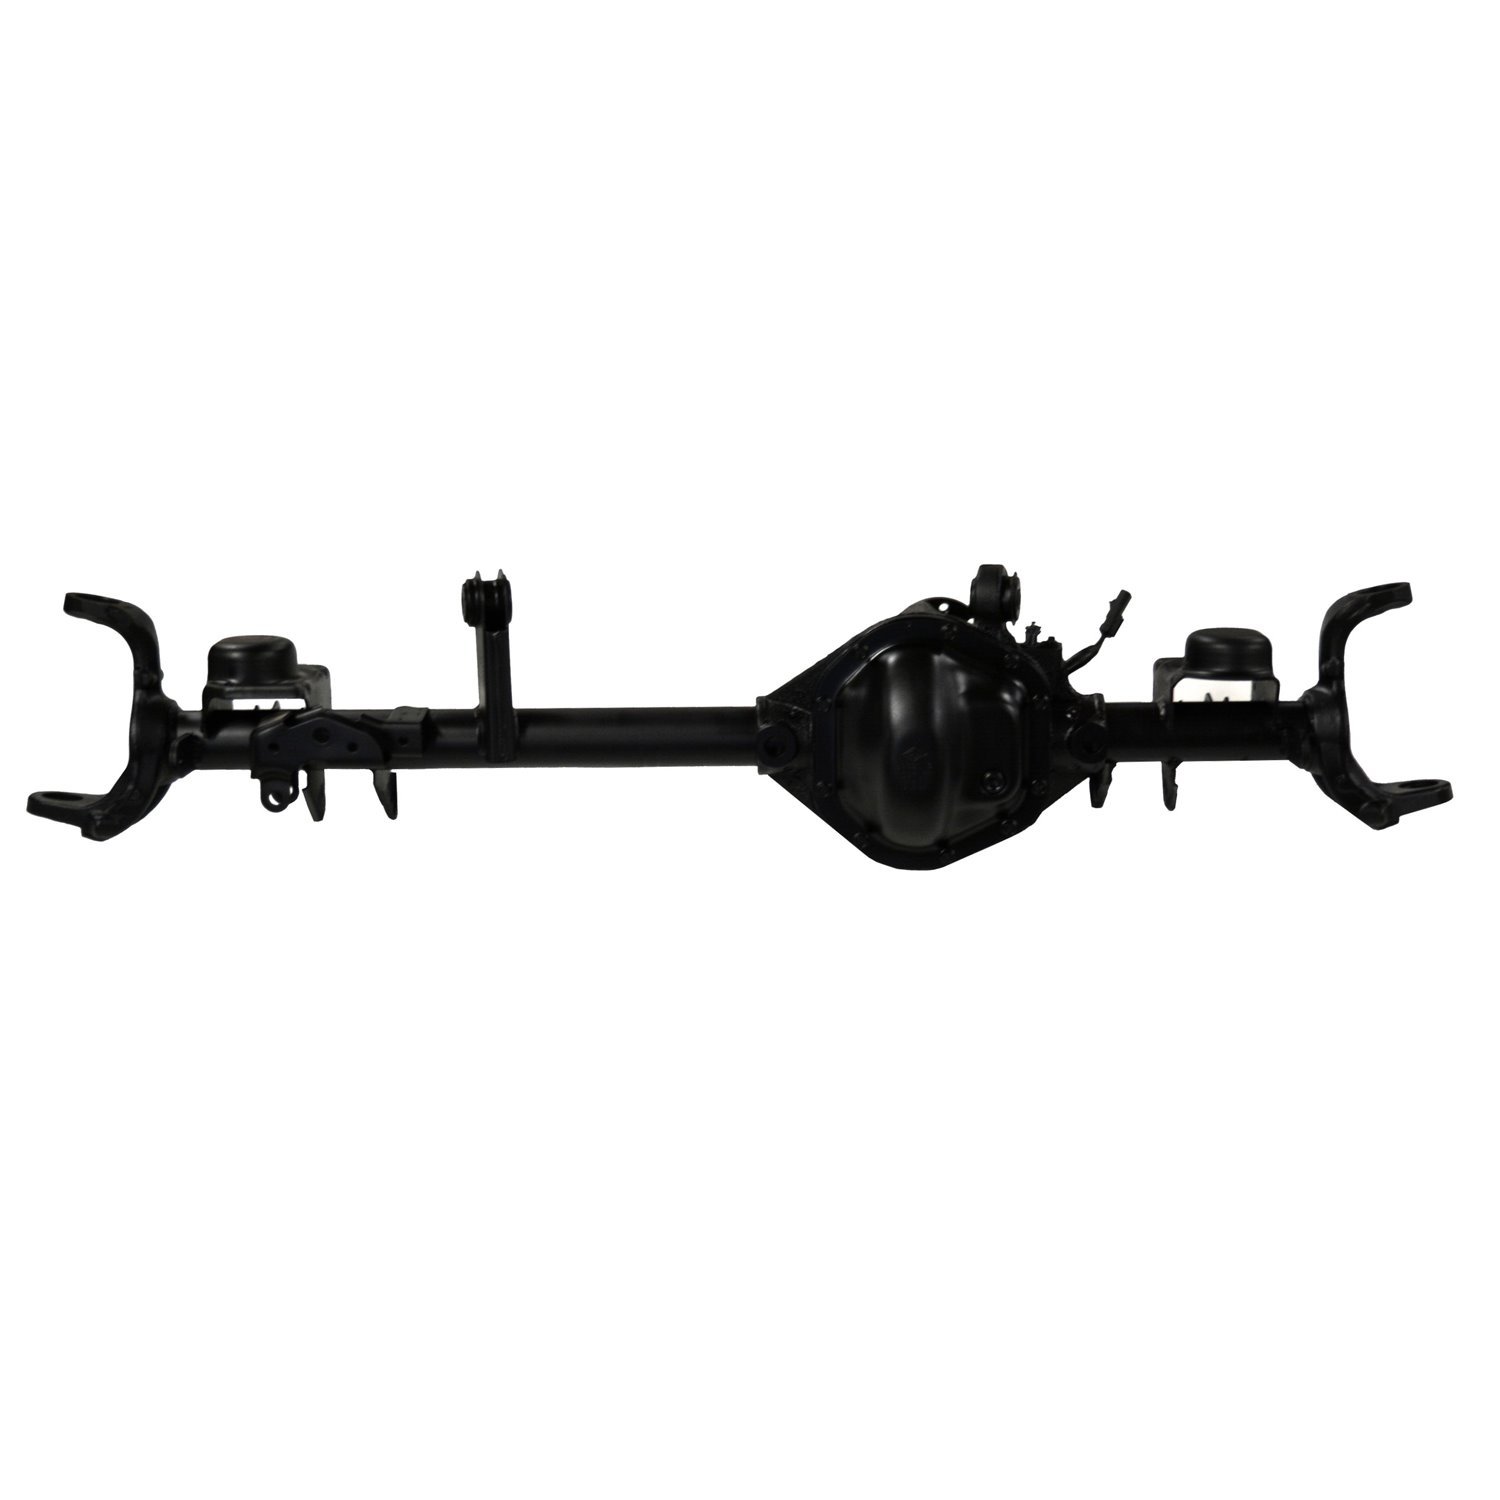 Remanufactured Complete Axle Assy for Dana 44 07-08 Wrangler 4.11 with Electric Locker